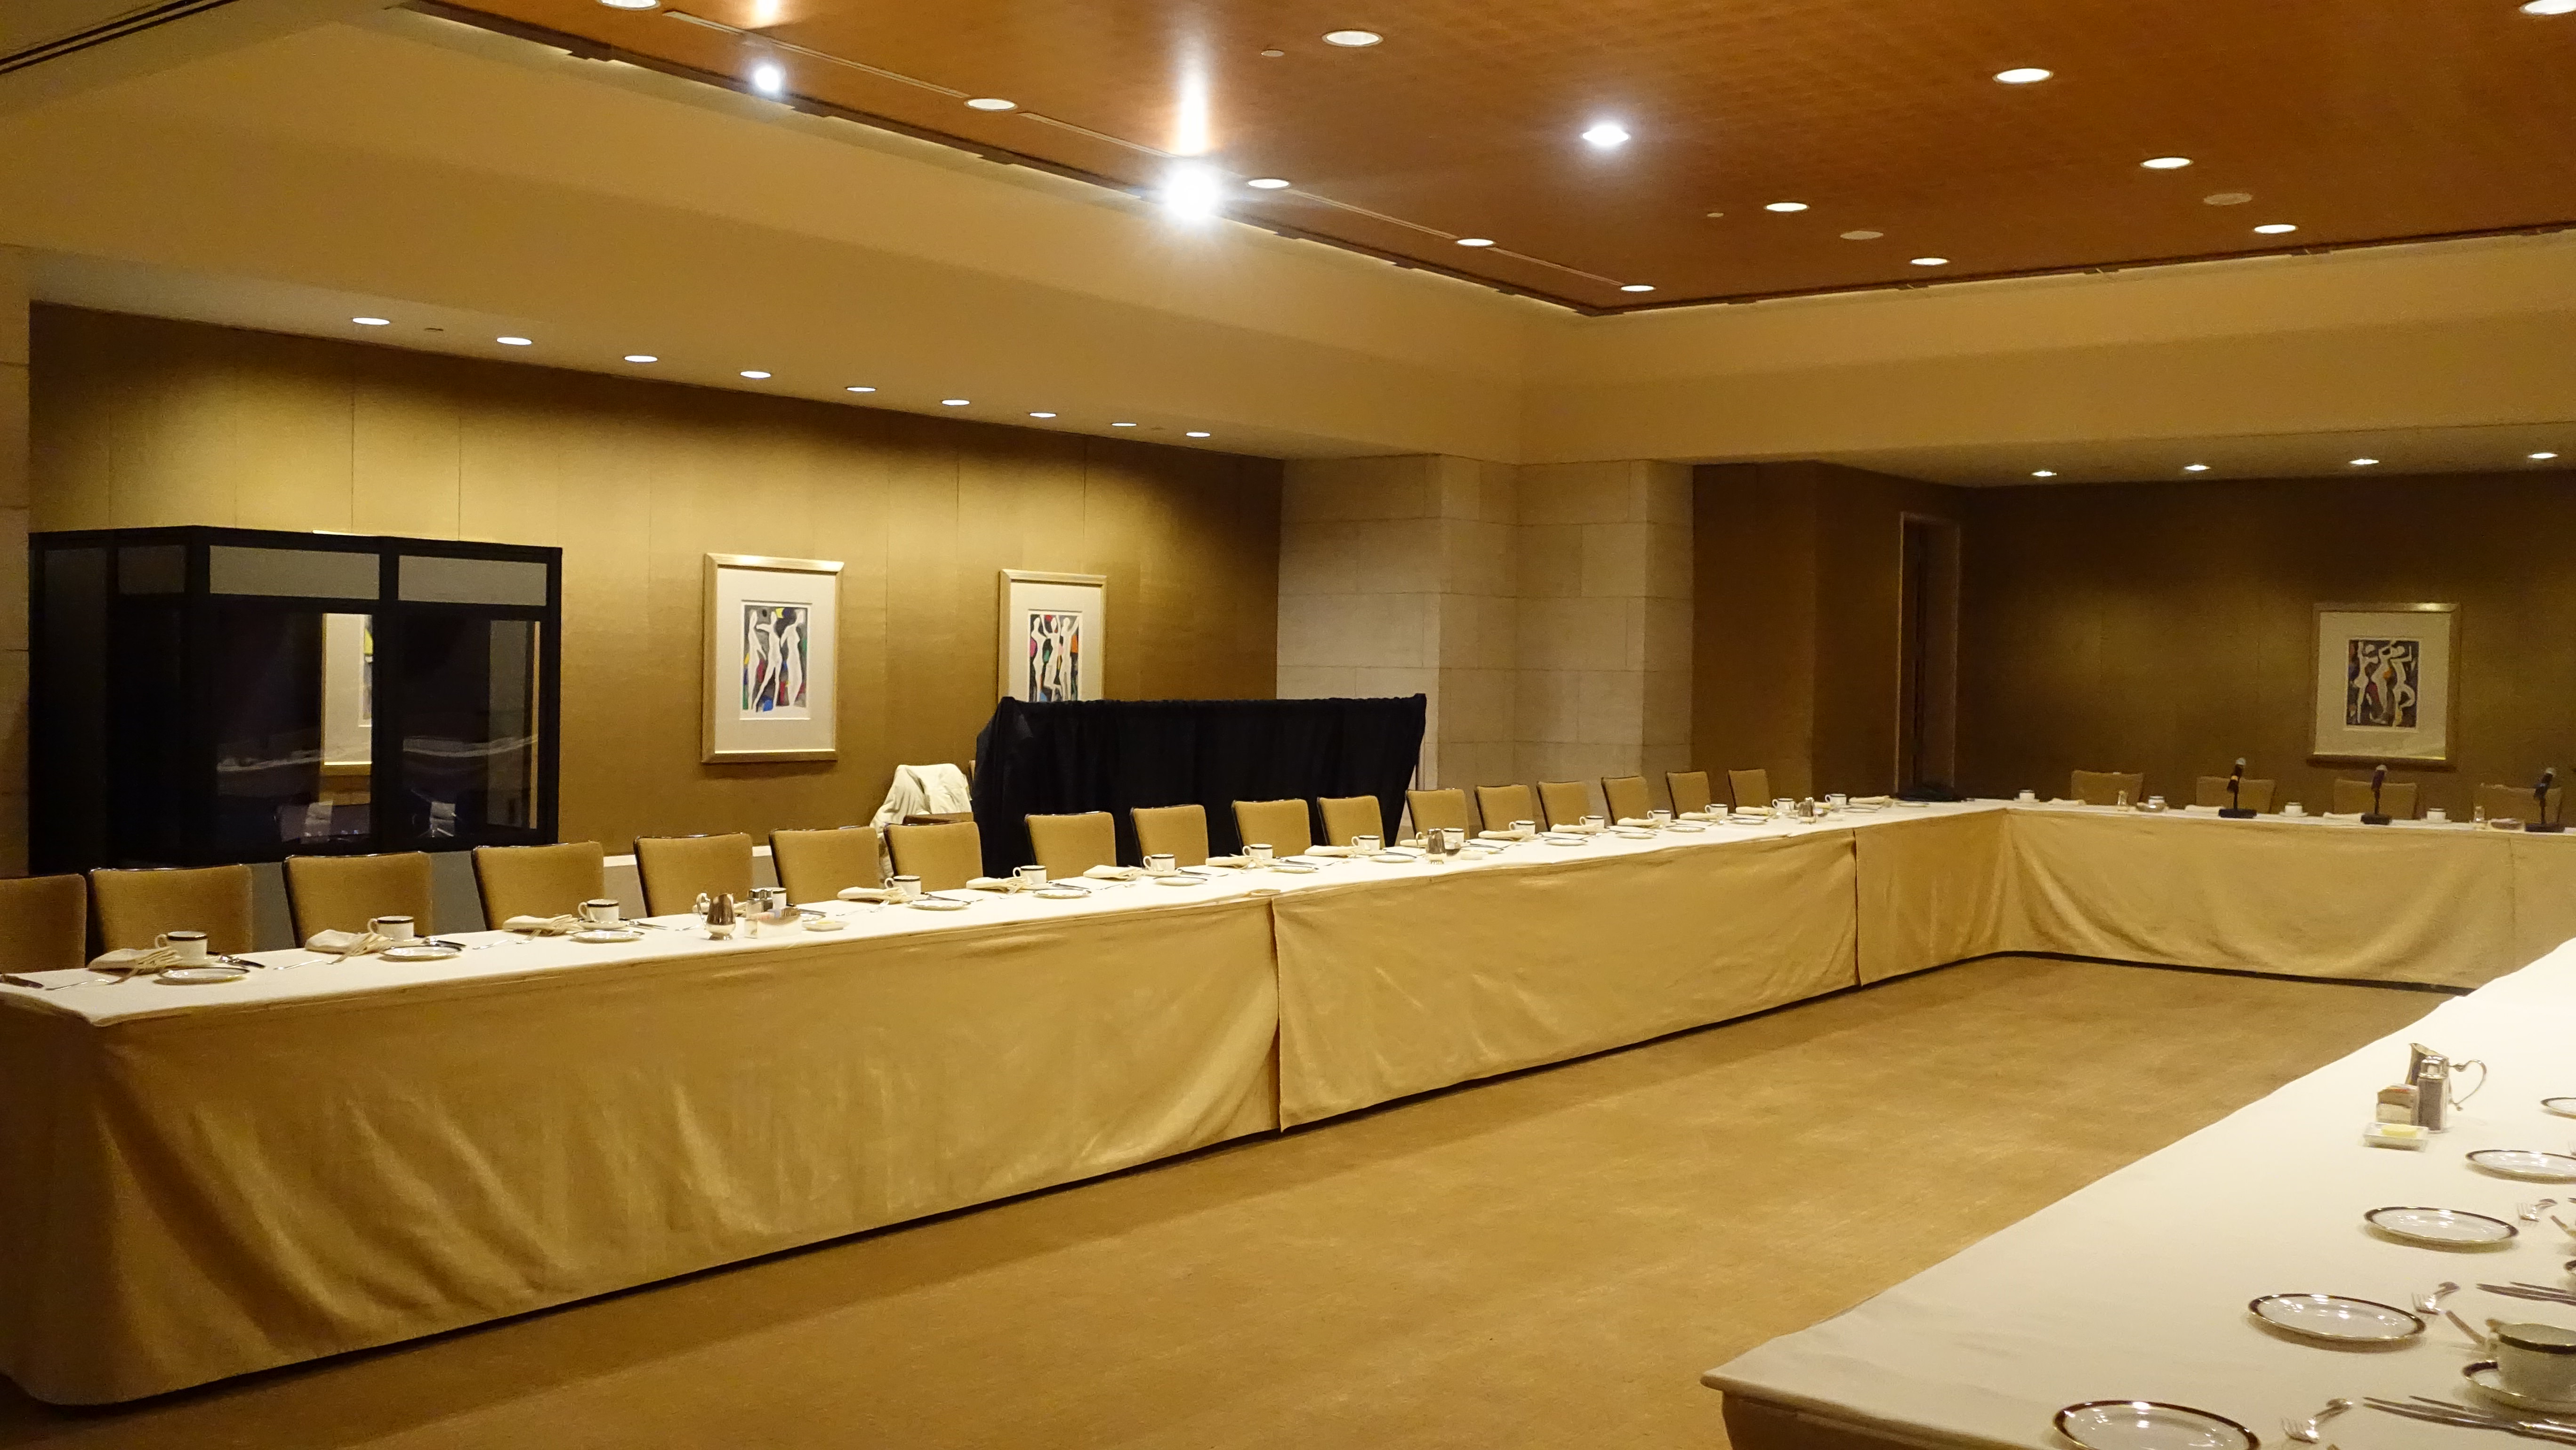 full booth in the corner of a meeting room with banquet u-shape style seating